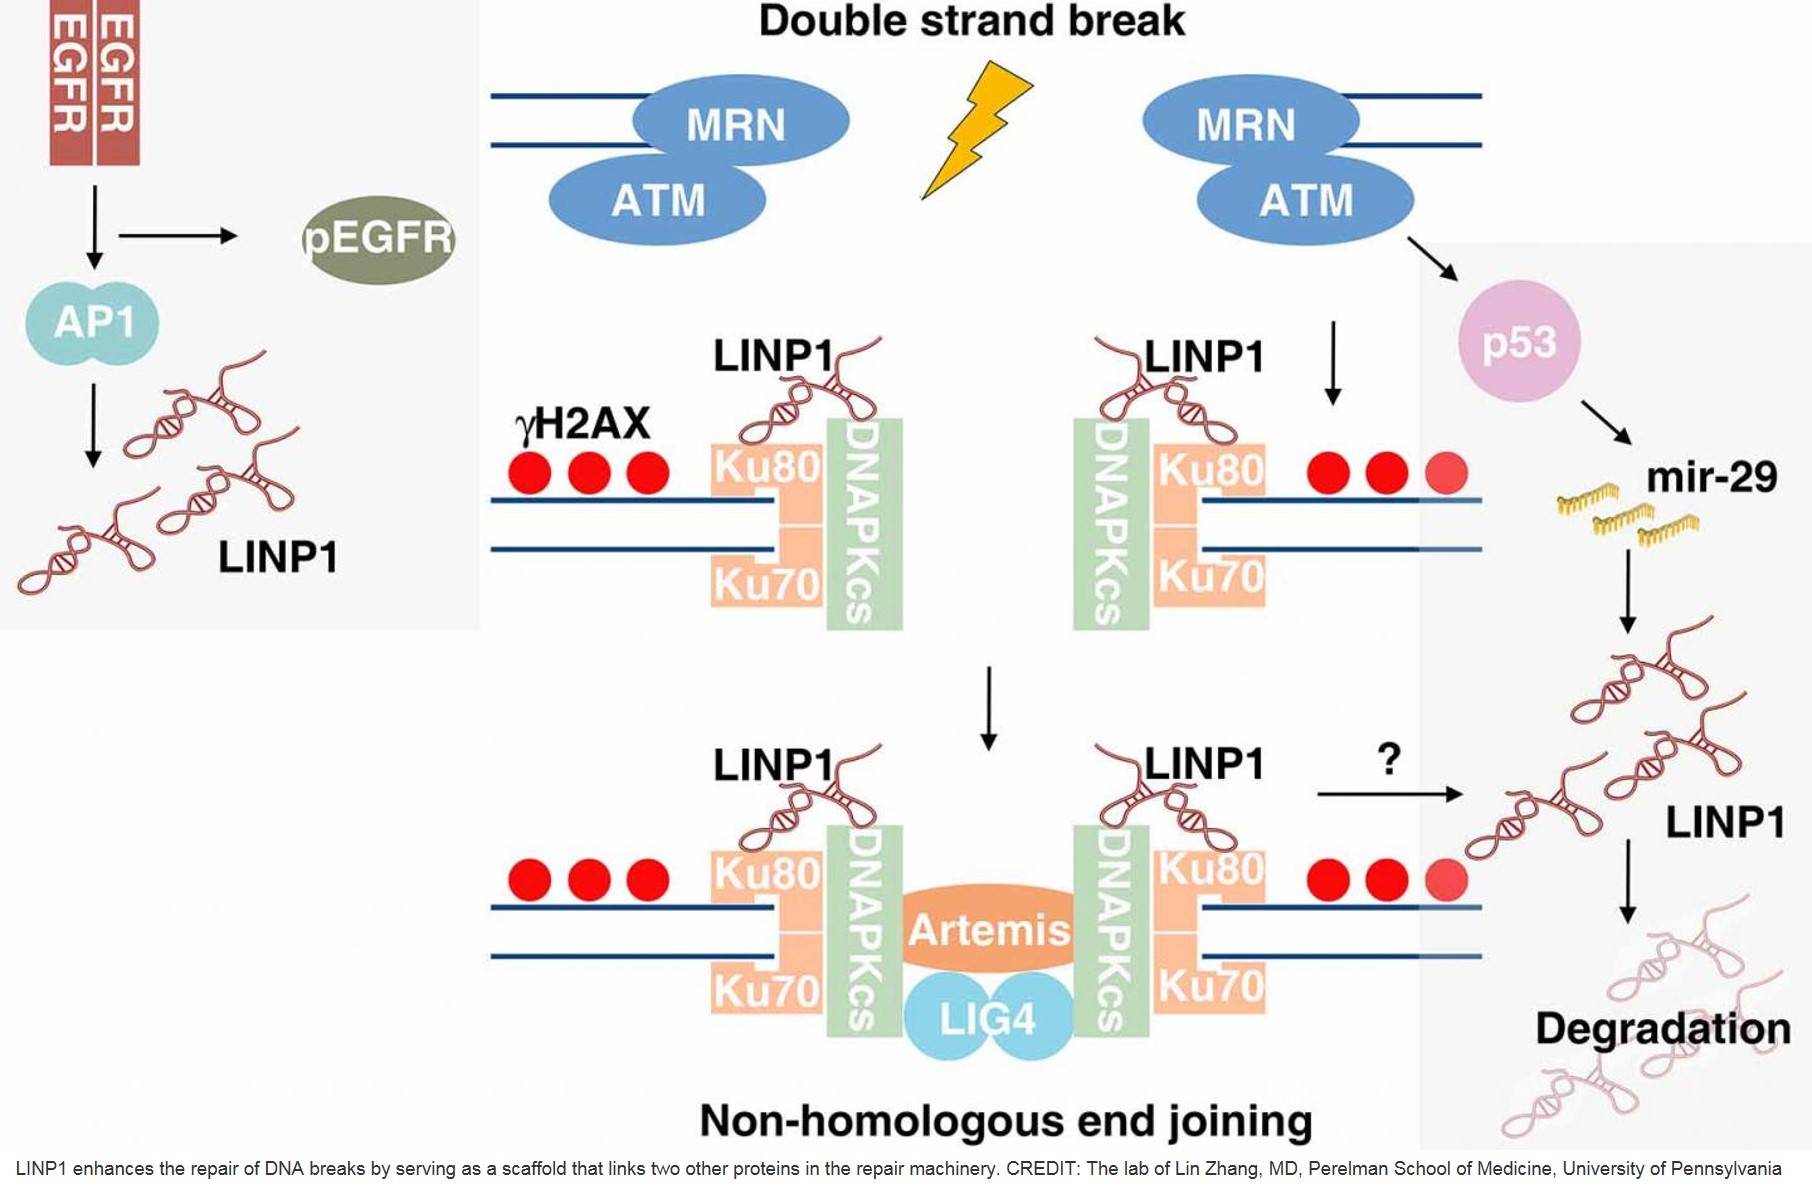 A long-noncoding RNA regulates repair of DNA breaks in triple-negative breast cancer cells